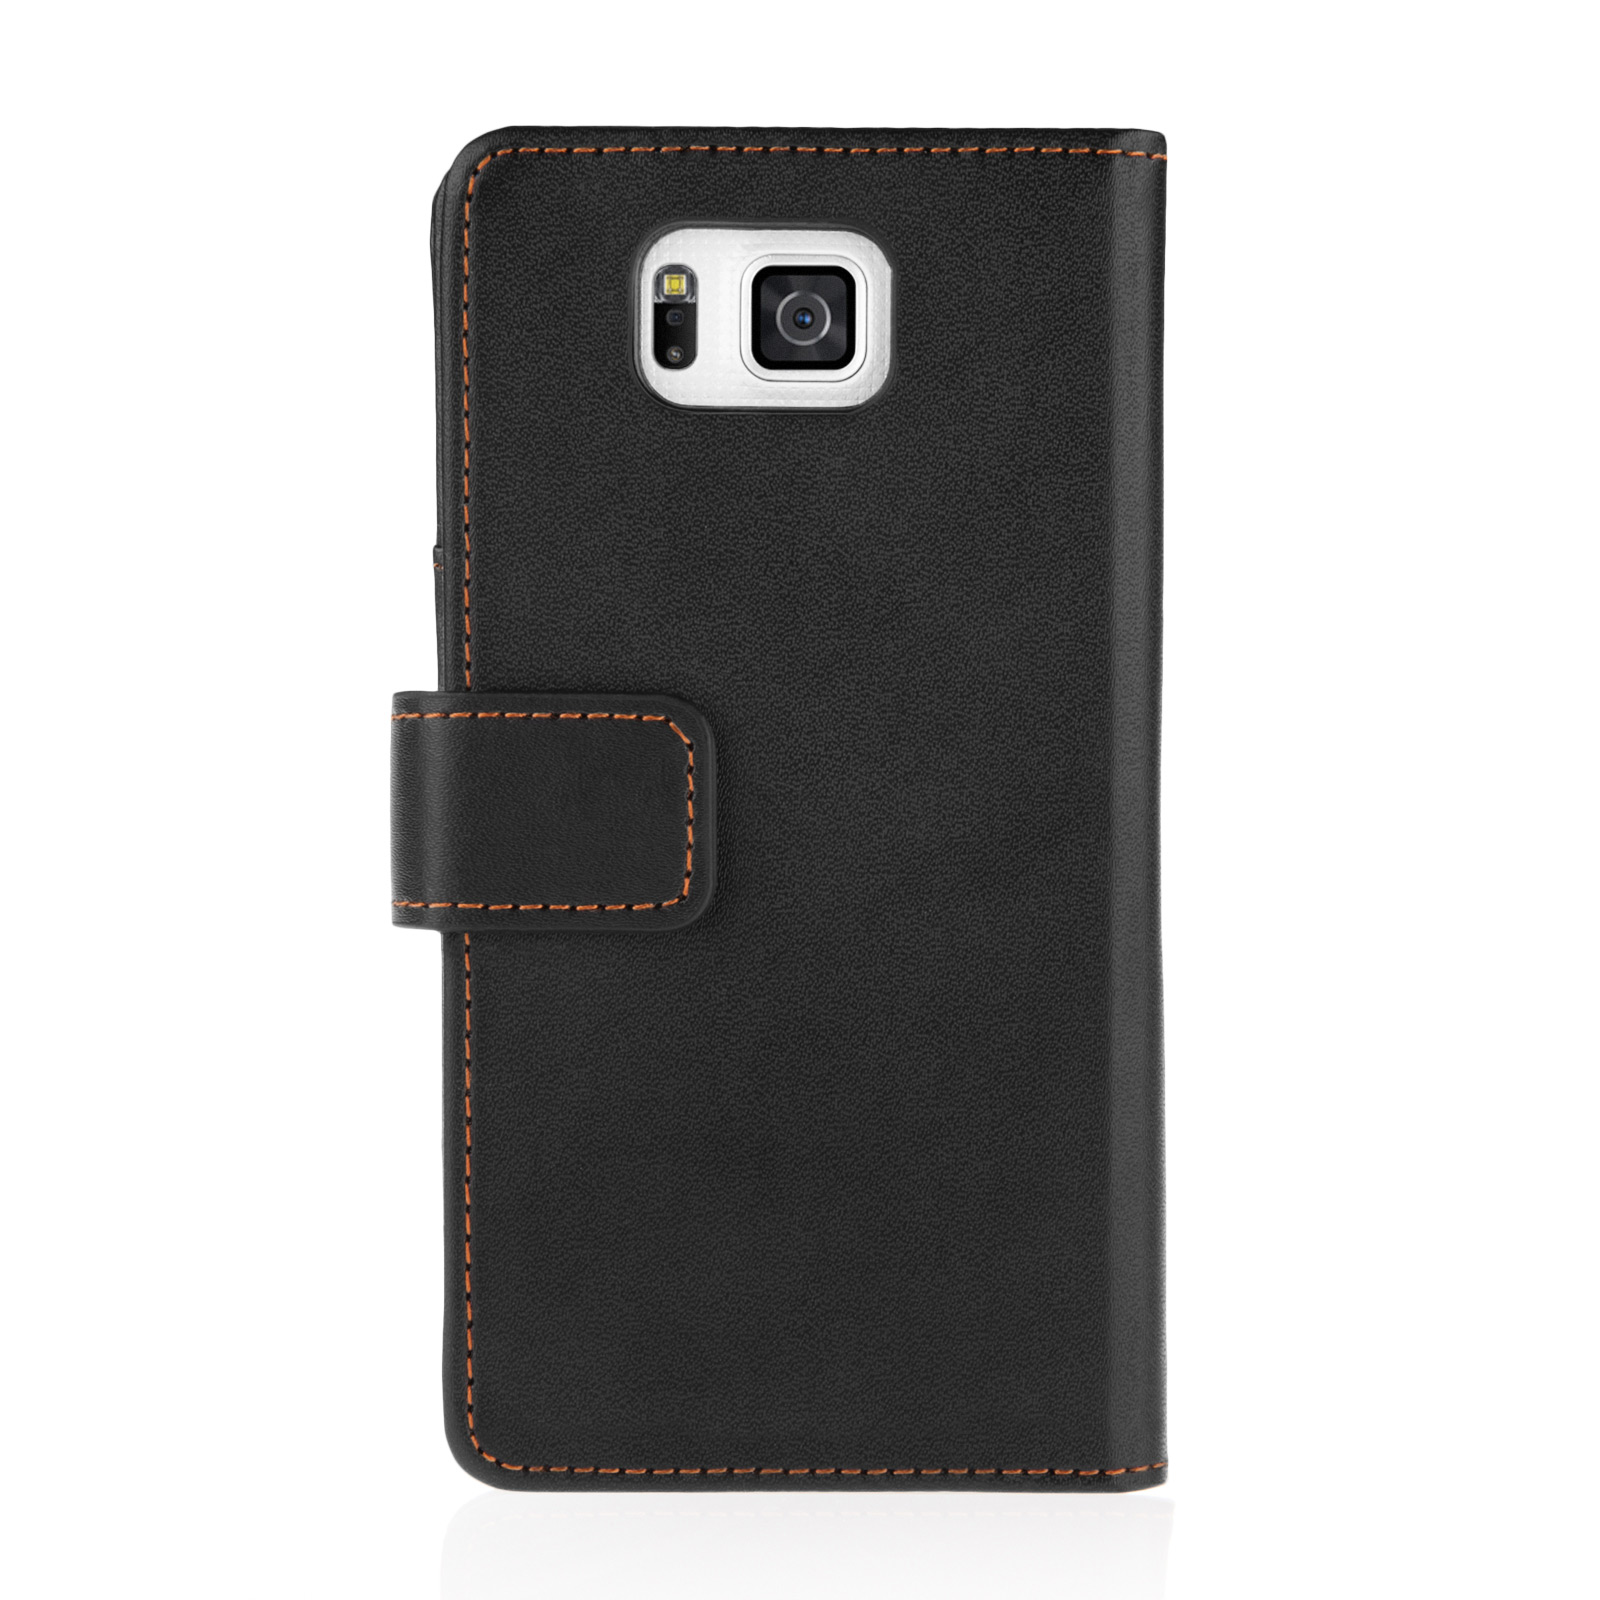 YouSave Samsung Galaxy Alpha Leather-Effect Wallet Case - Black